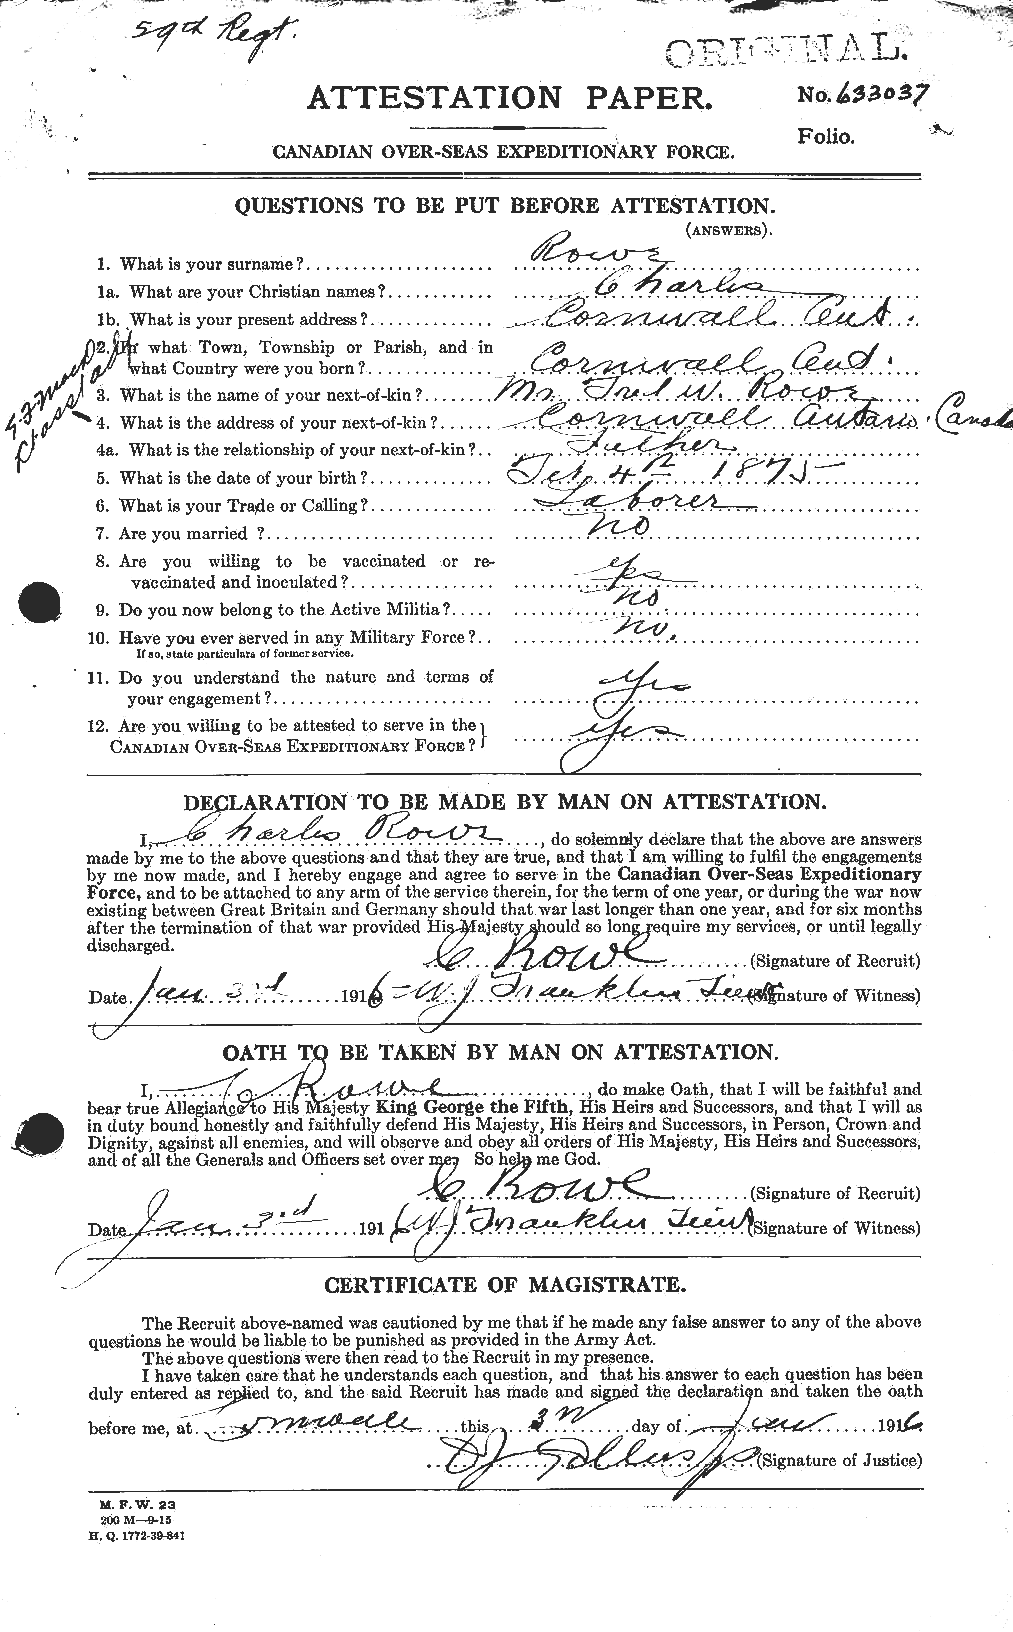 Personnel Records of the First World War - CEF 615813a